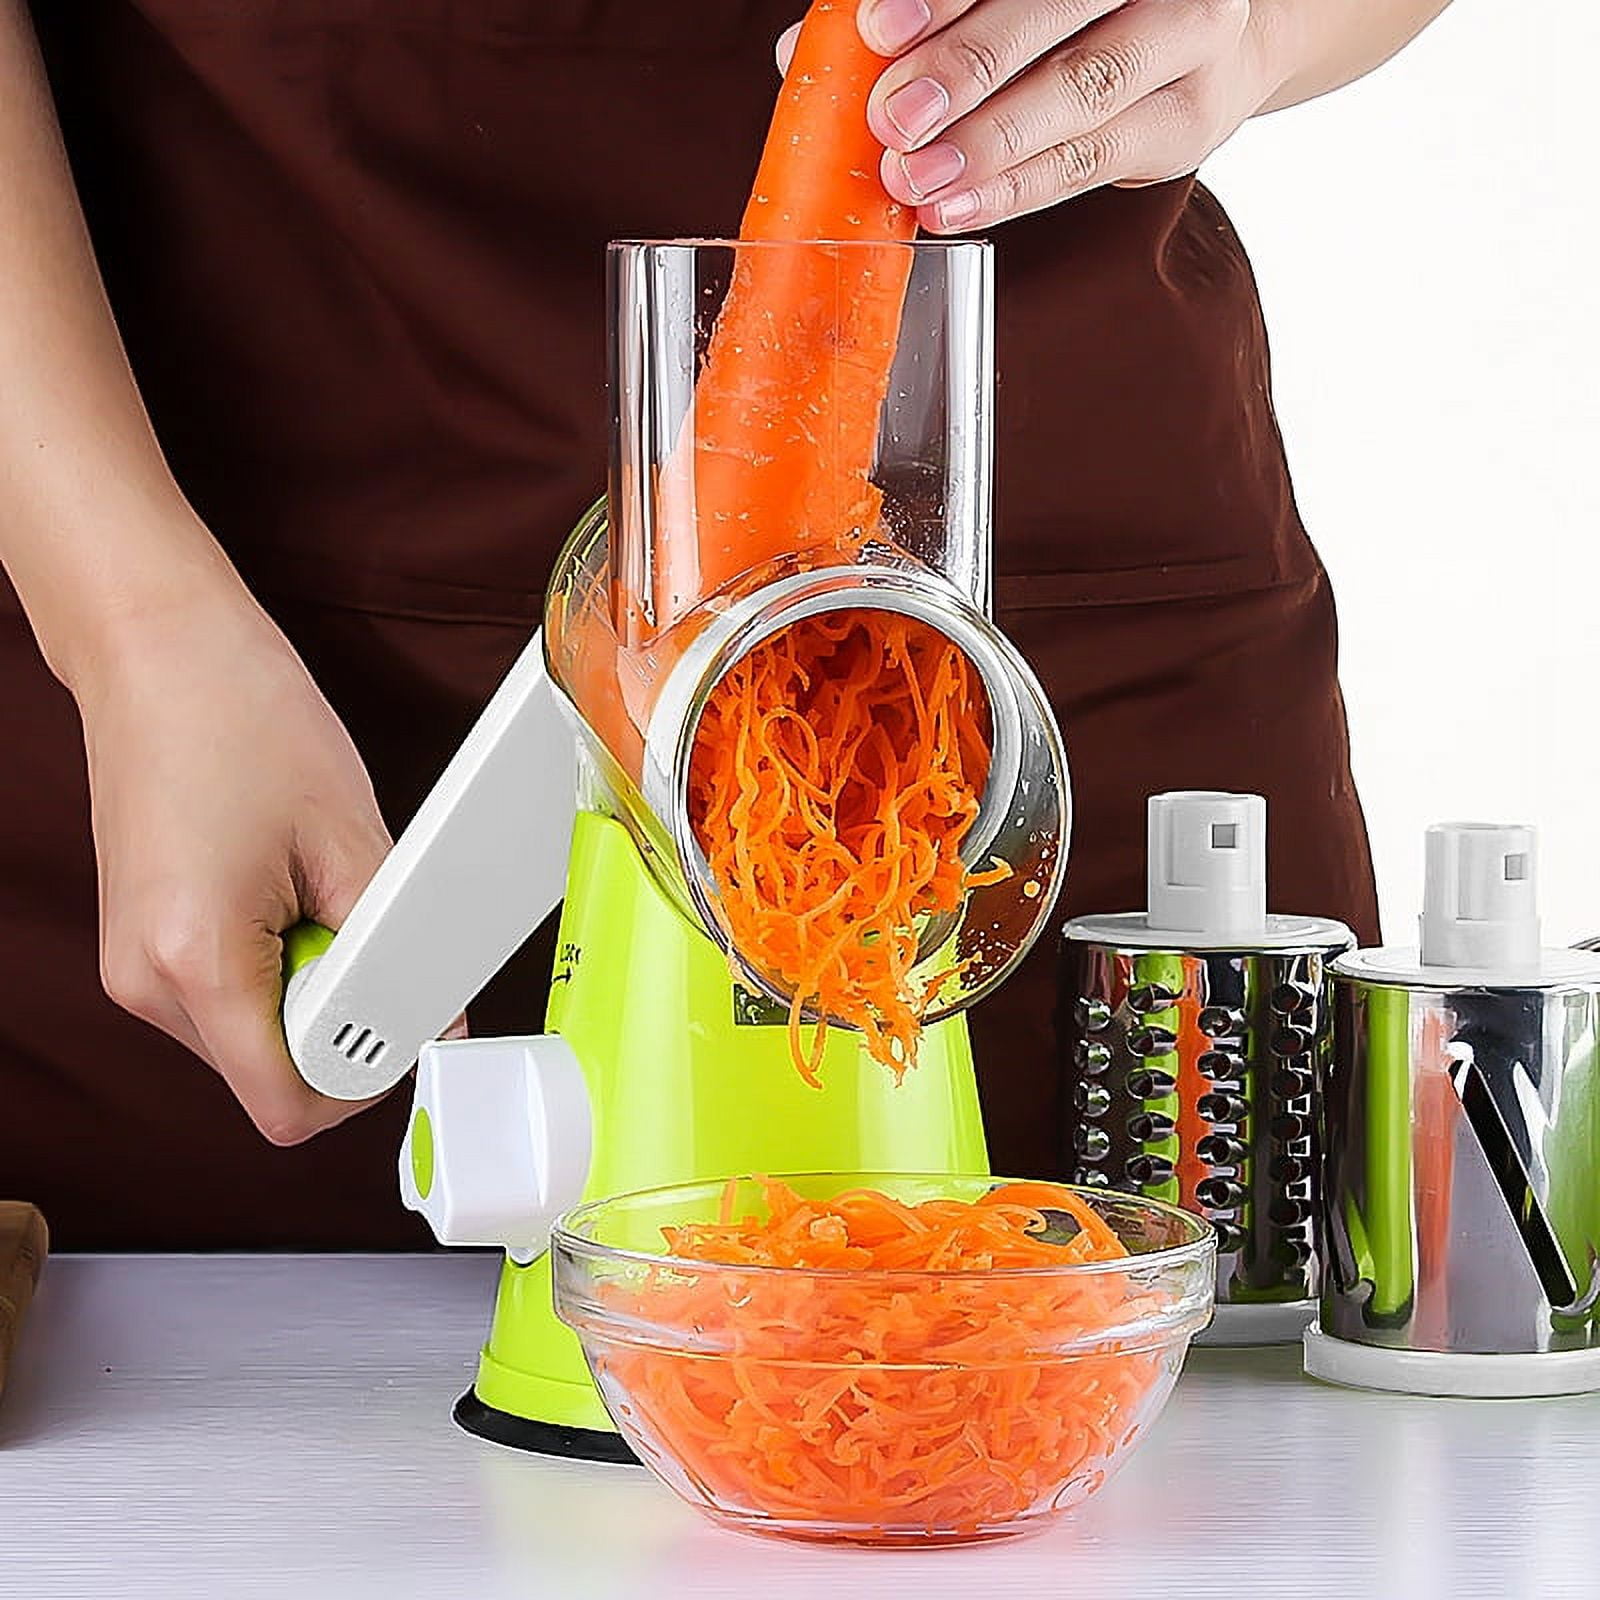 Manual Manual Rotary Vegetable Slicer Slicer Kitchen Roller Tool For Round  Graters, Potato, Carrot, And Cheese Shredding From Cleanfoot_elitestore,  $14.66